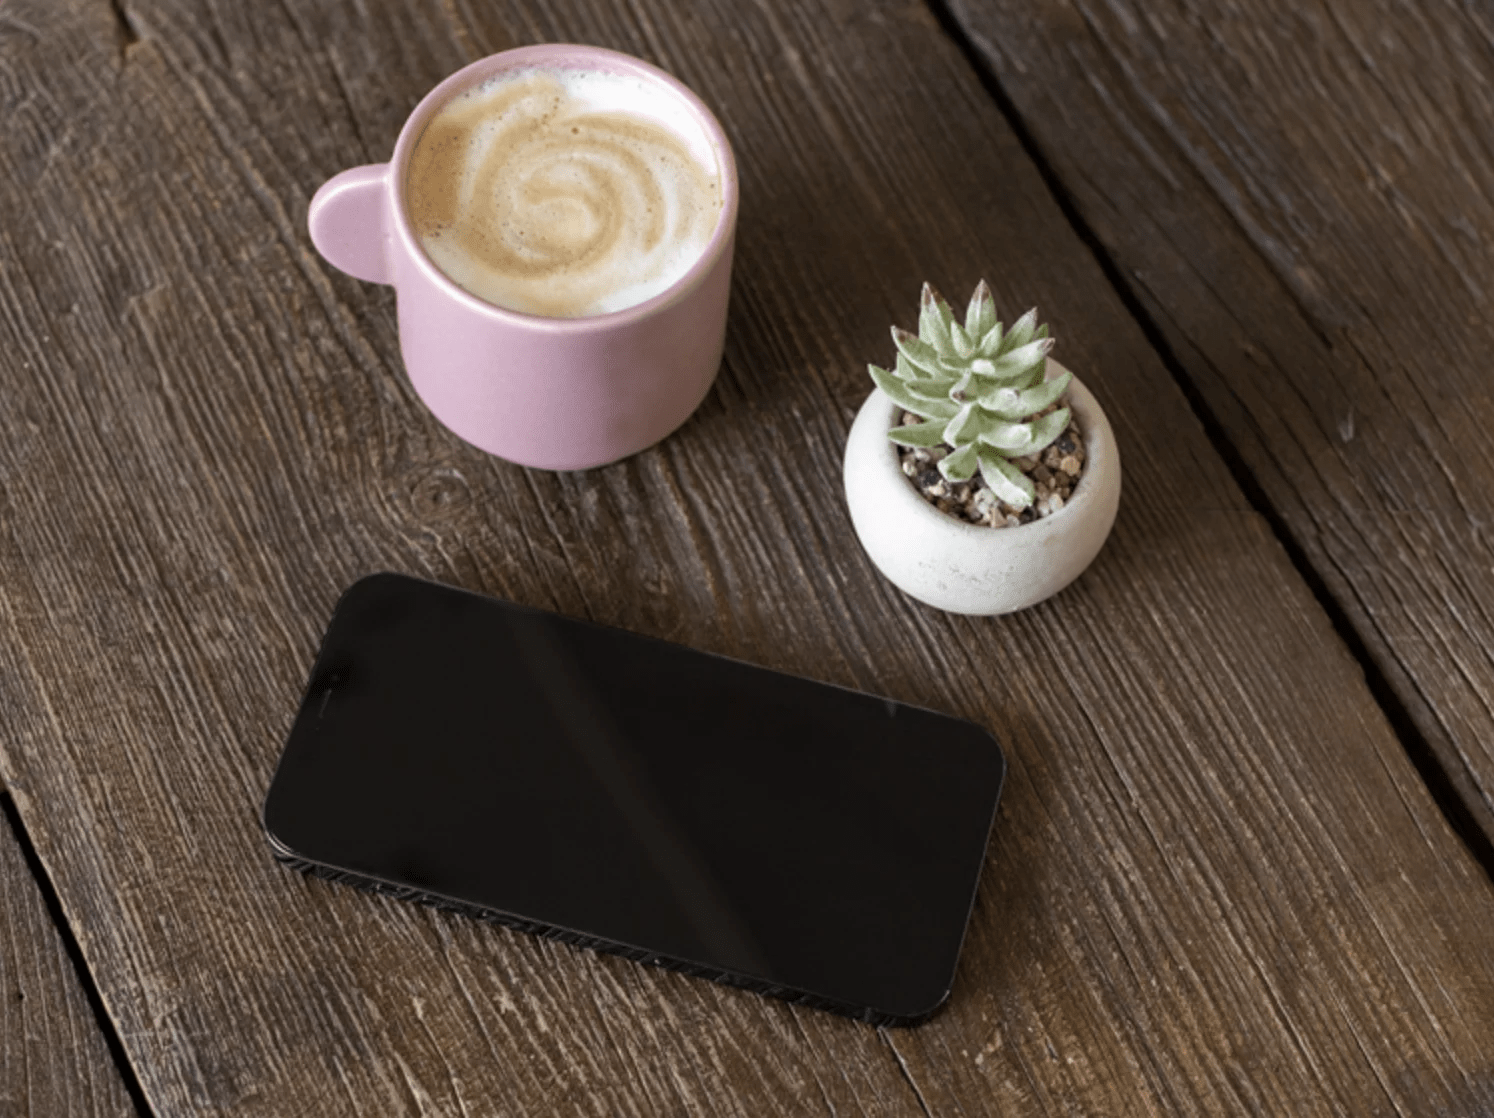 iPhone mockup on a wooden table with a coffee cup and plant, ready for your design